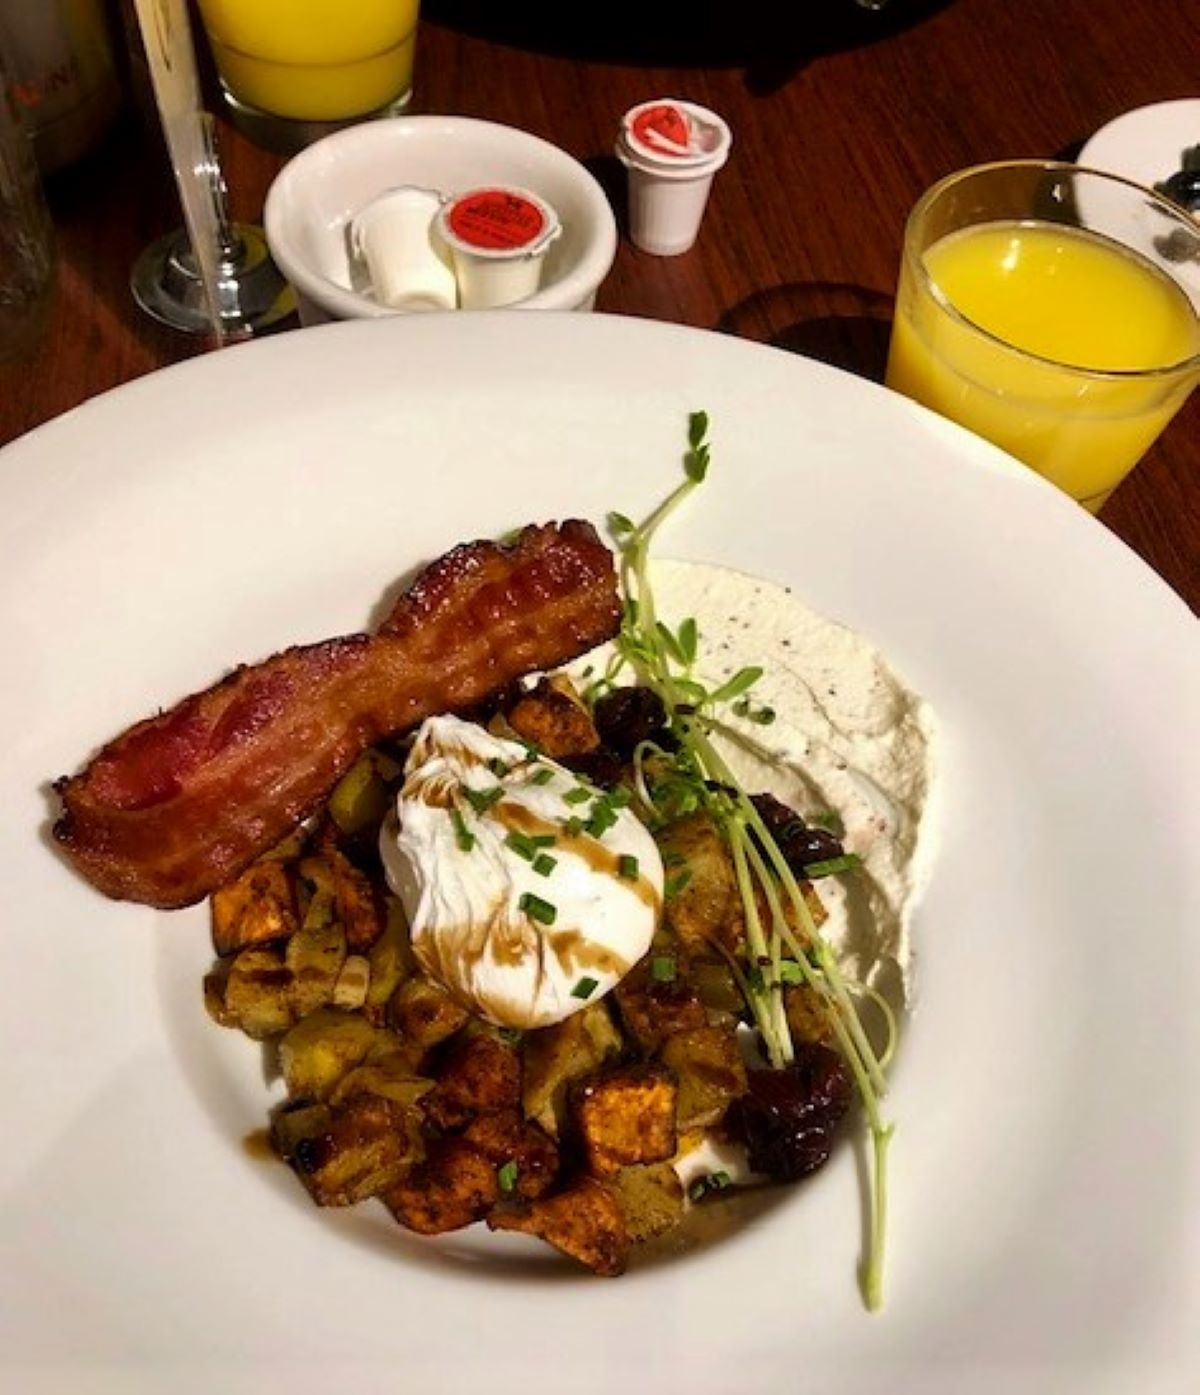 Breakfast at Black Star Farms, with a poached egg over sweet potato hash, a side of bacon,  and fresh orange juice.